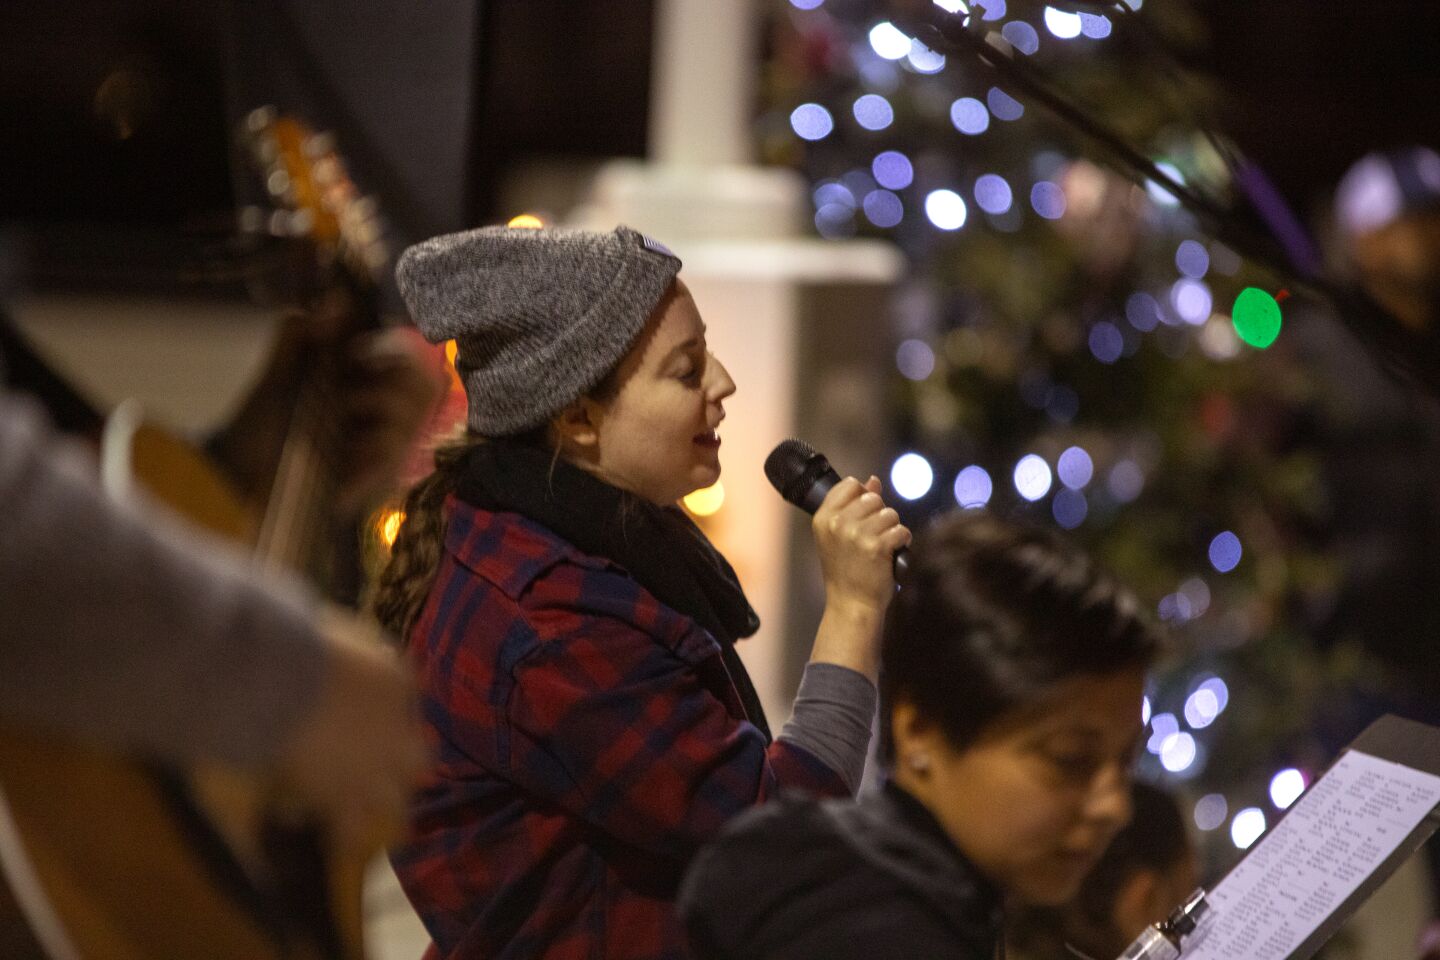 Singer Katie Hedd entertains the crowd with Christmas carols at Sunday night's Shine Bright event by First United Methodist Church of Costa Mesa.